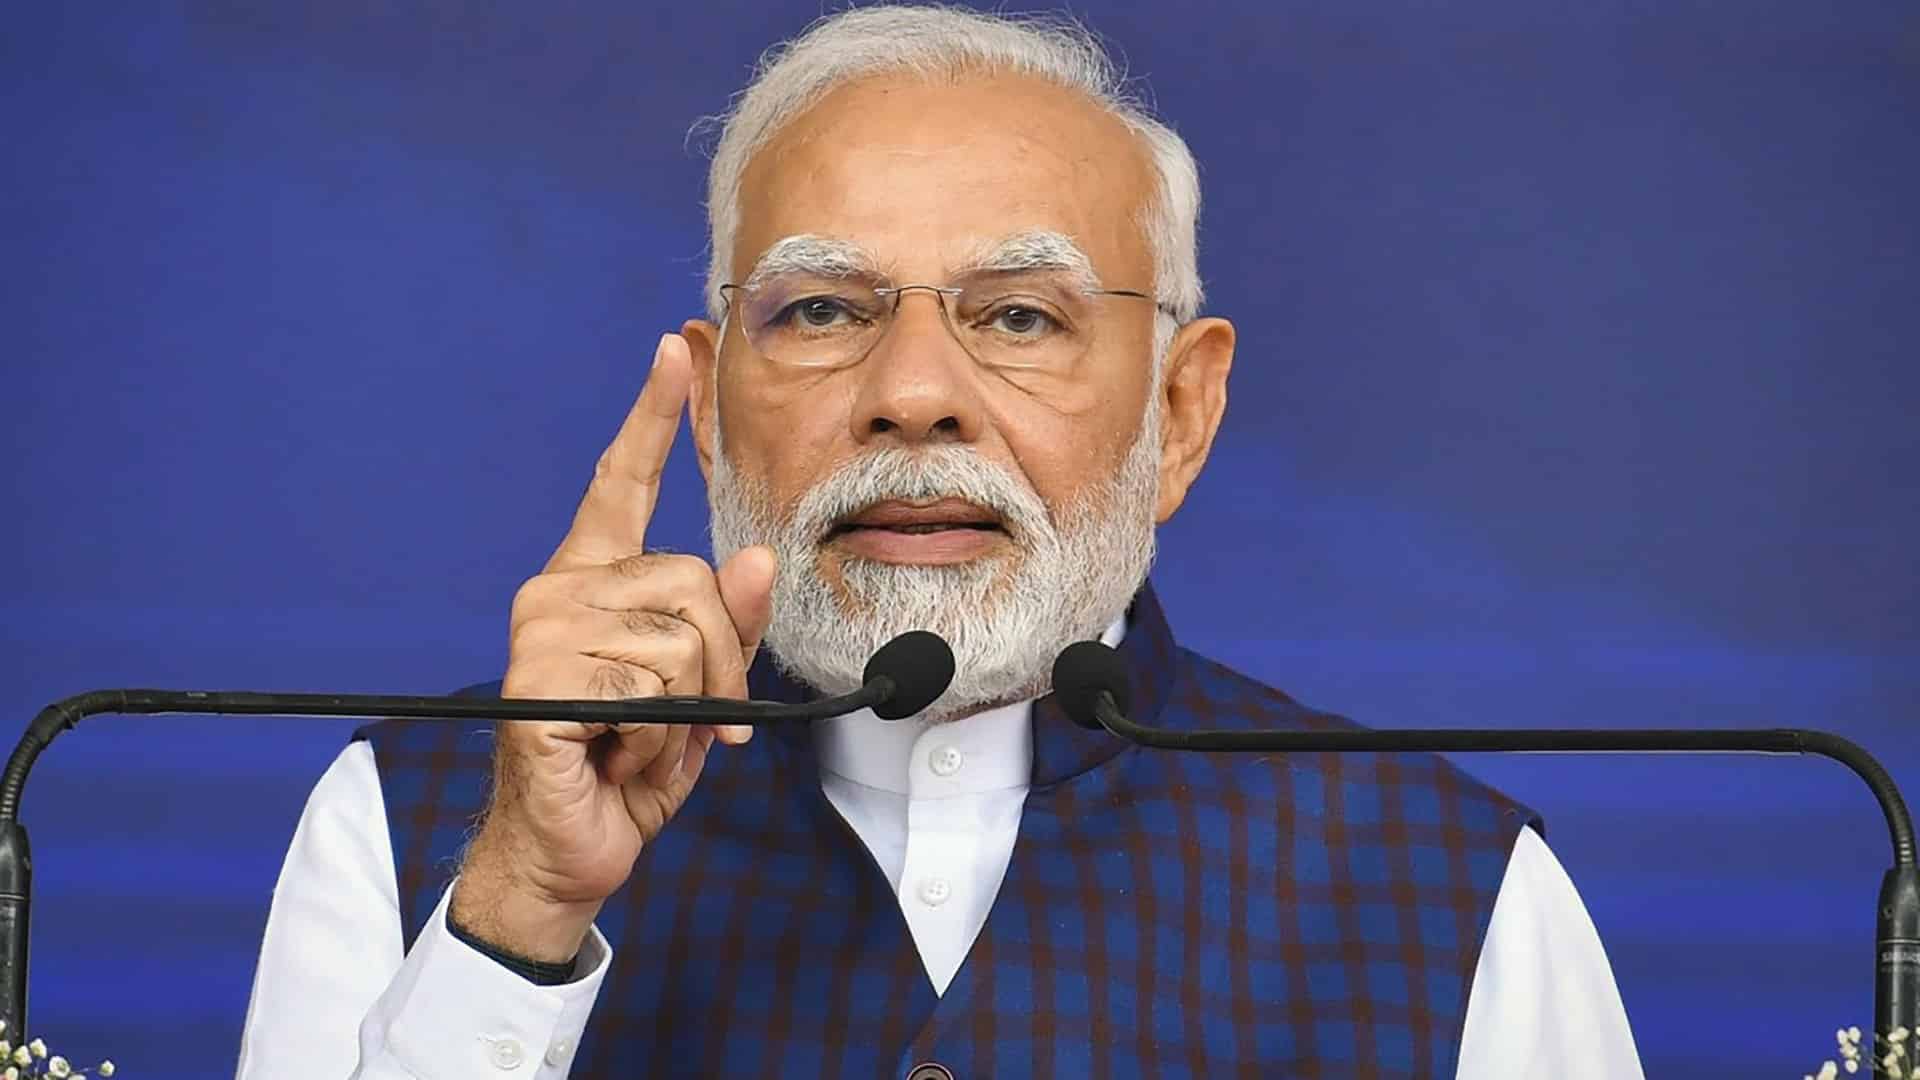 Tech use will help India become developed nation by 2047: PM Modi